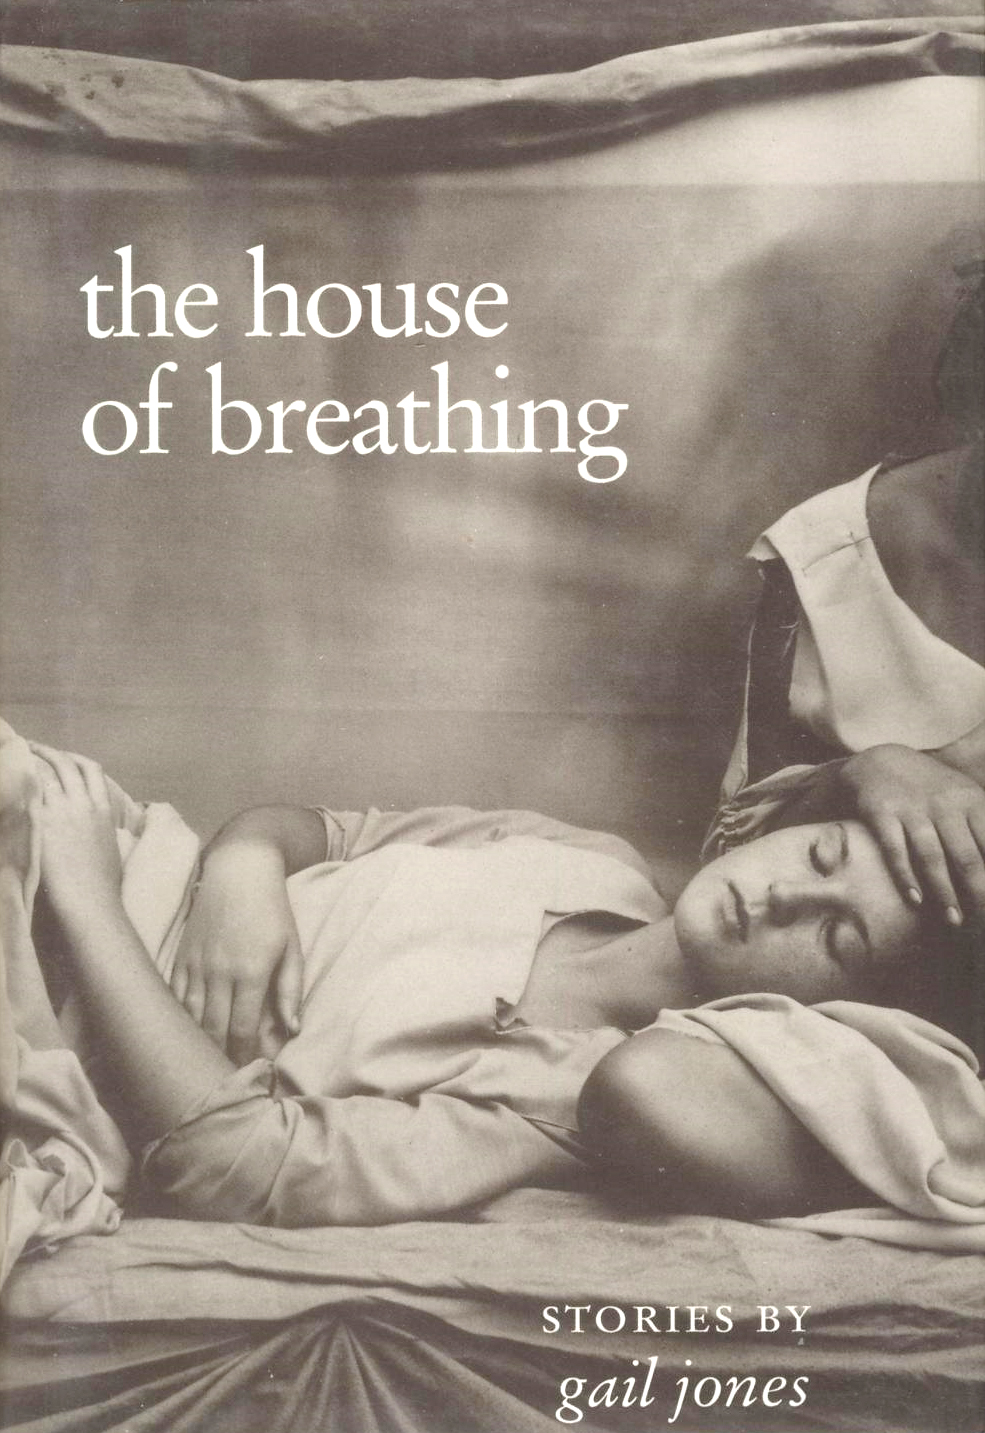 The House of Breathing